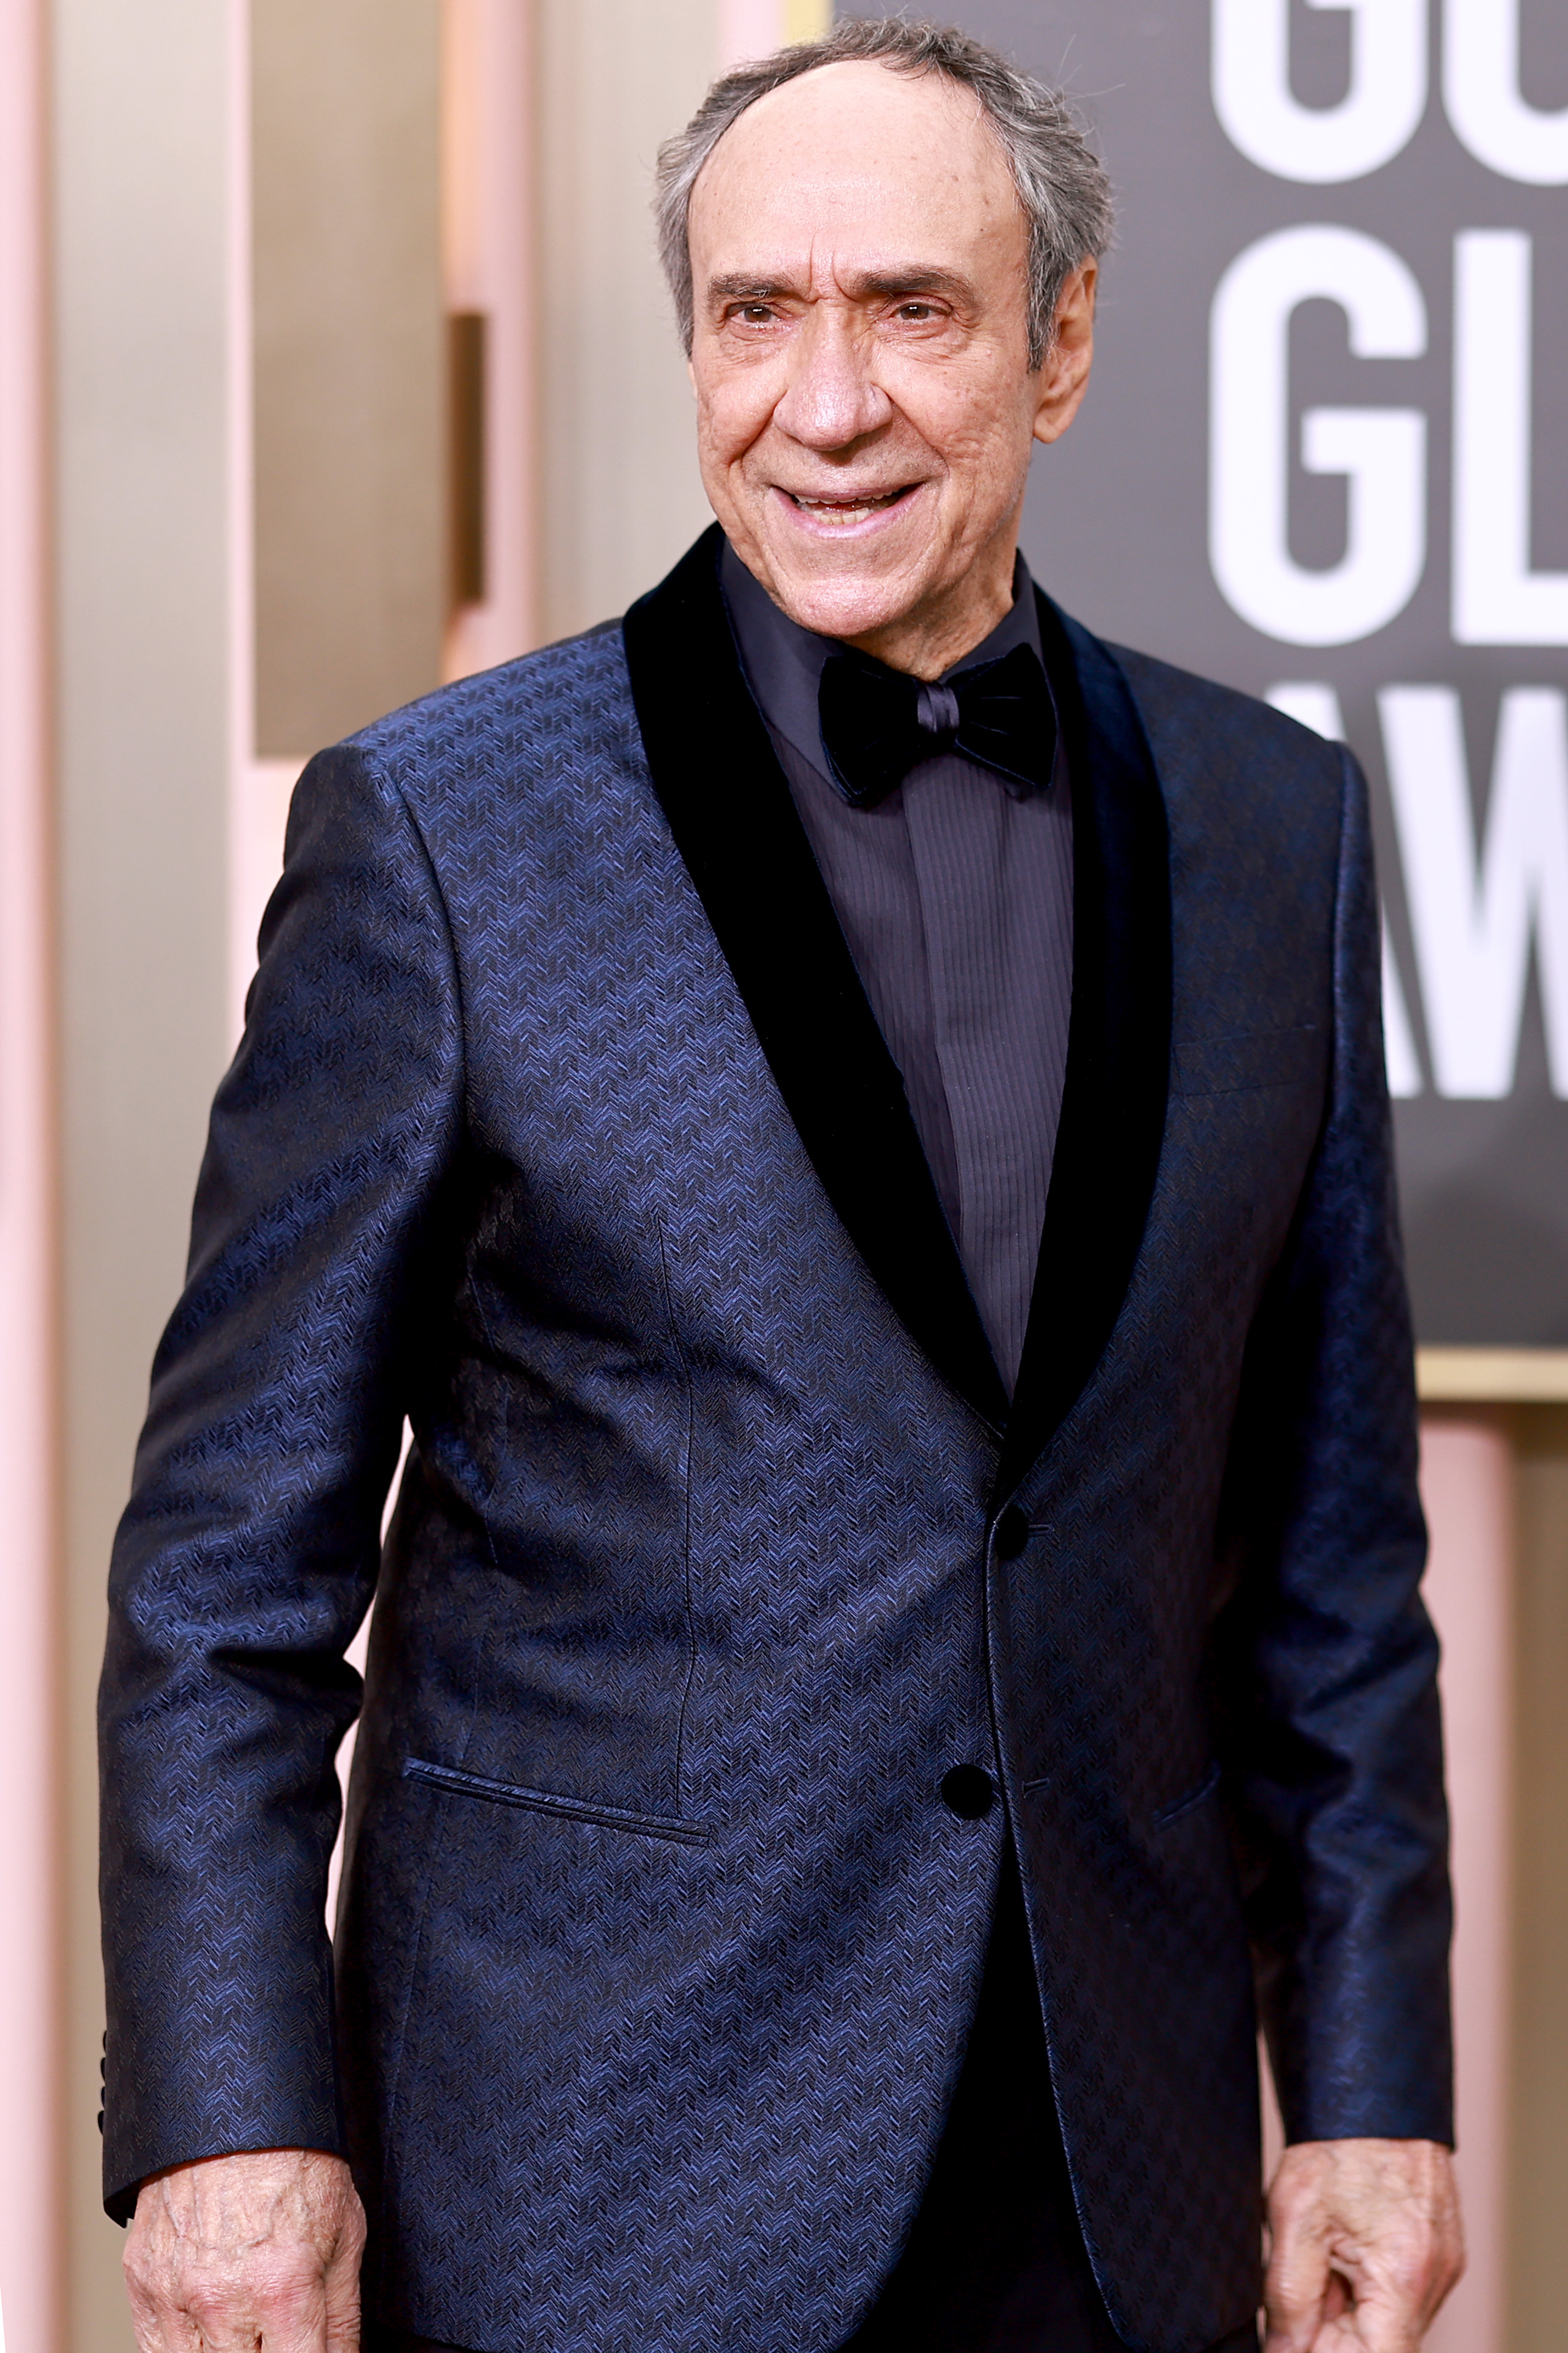 F. Murray Abraham attends the 80th Annual Golden Globe Awards at The Beverly Hilton on January 10, 2023, in Beverly Hills, California. | Source: Getty Images